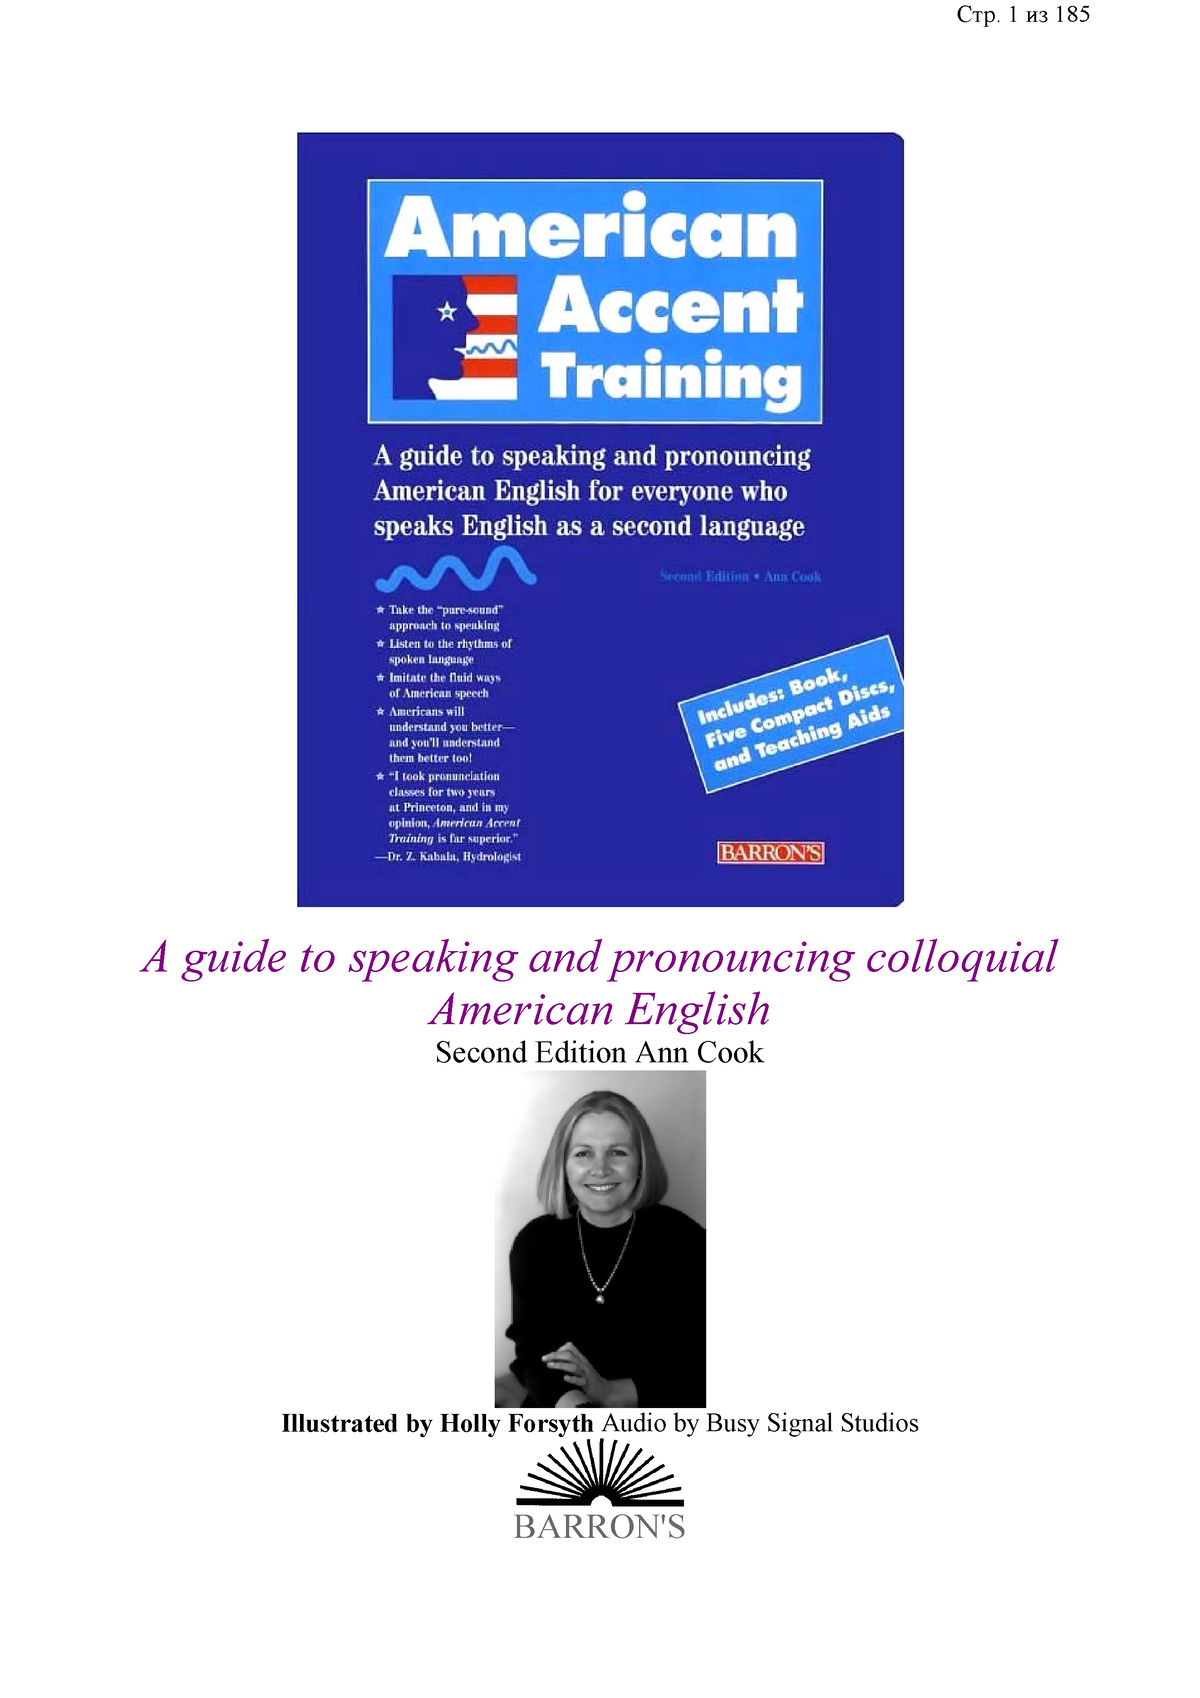 American Accent Training - A guide to speaking and pronouncing colloquial American English Second - Studocu